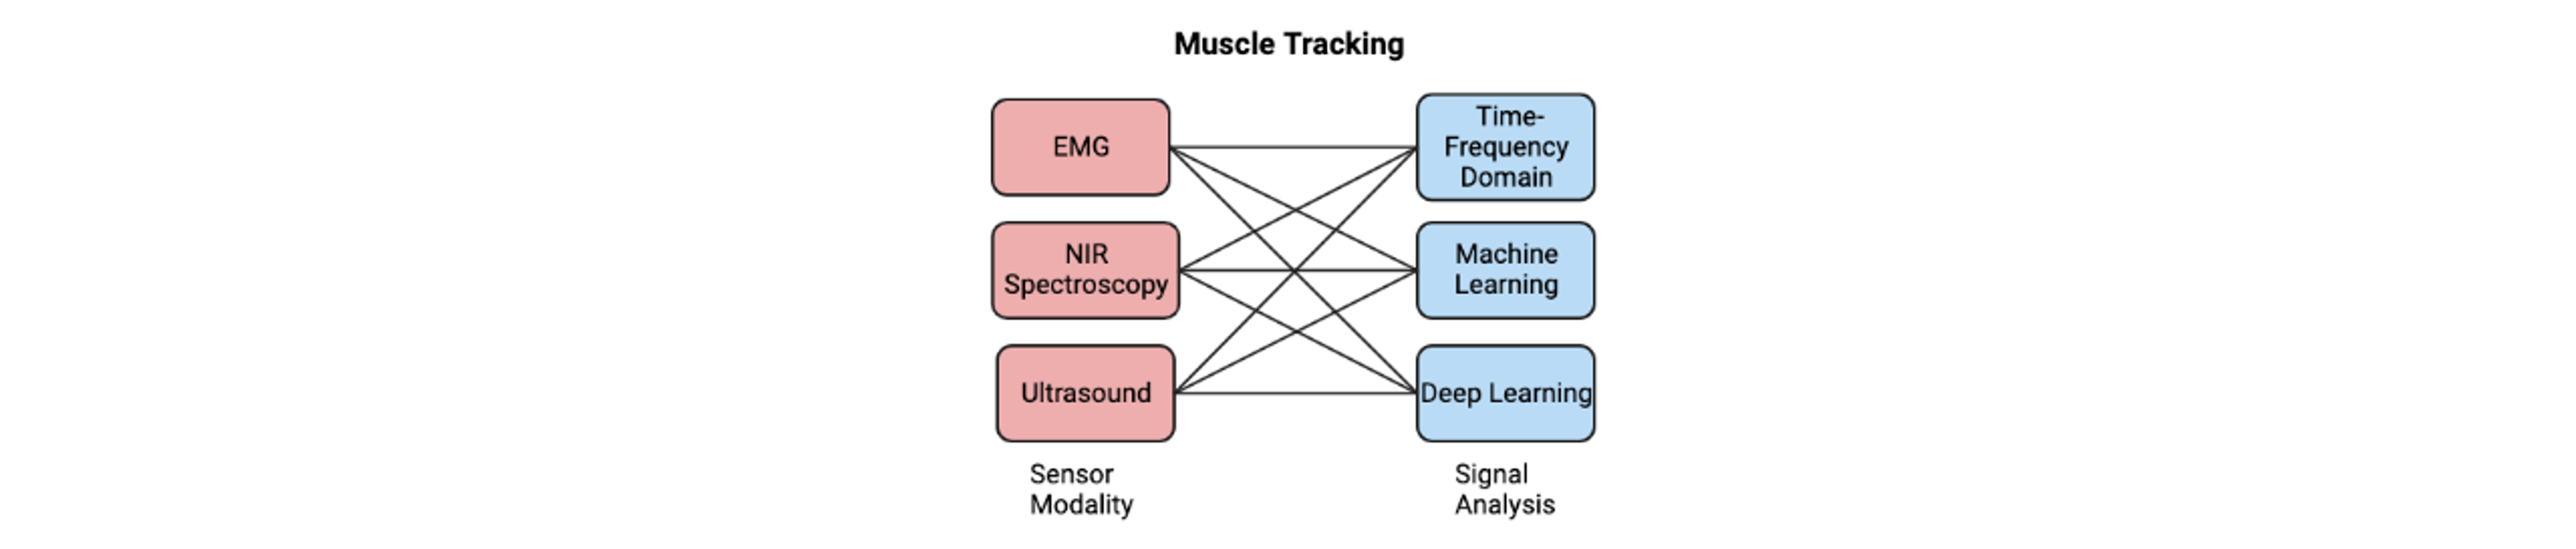 muscle_tracking